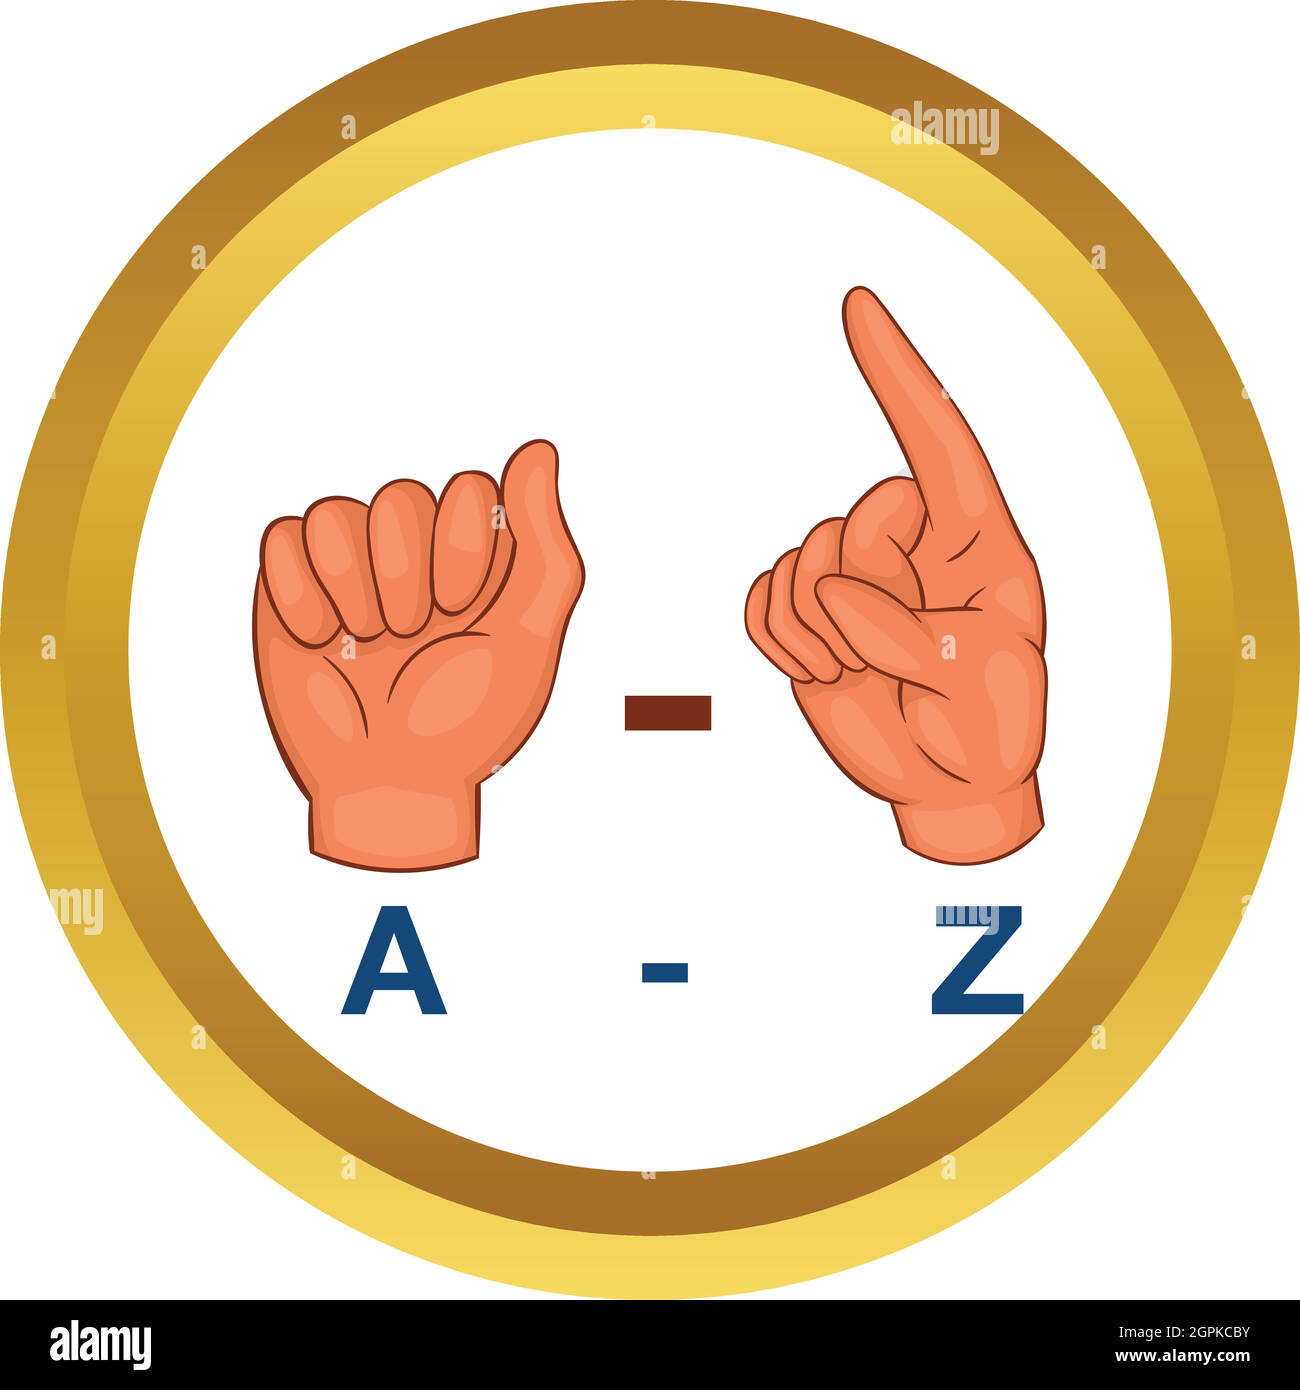 Language hand sign vector icon Stock Vector